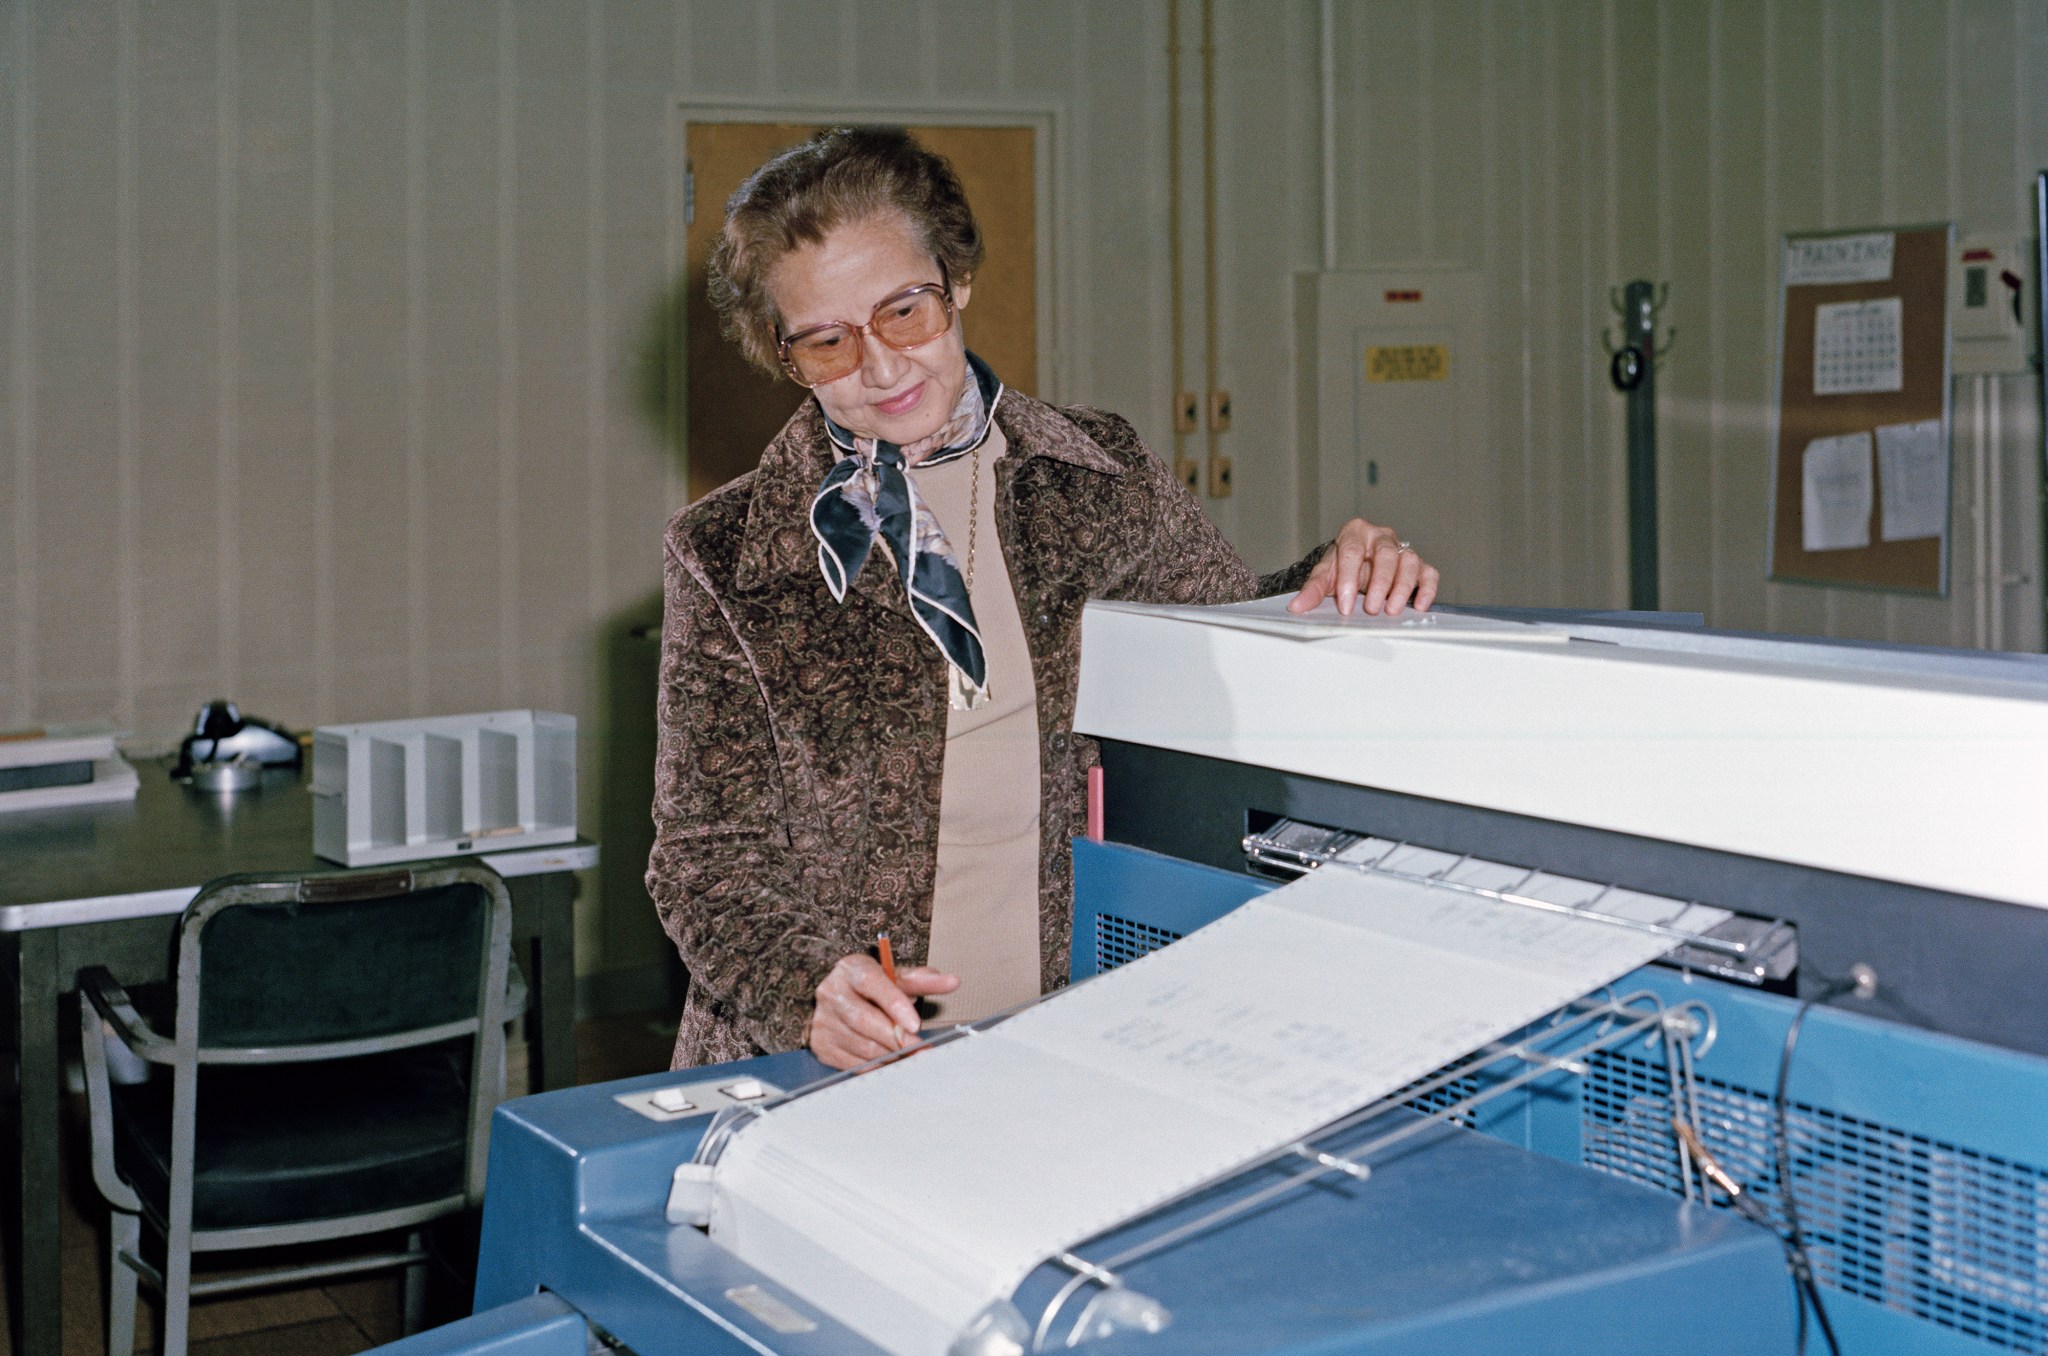 Mathematician Katherine Johnson at work at NASA Langley Research Center in 1980.